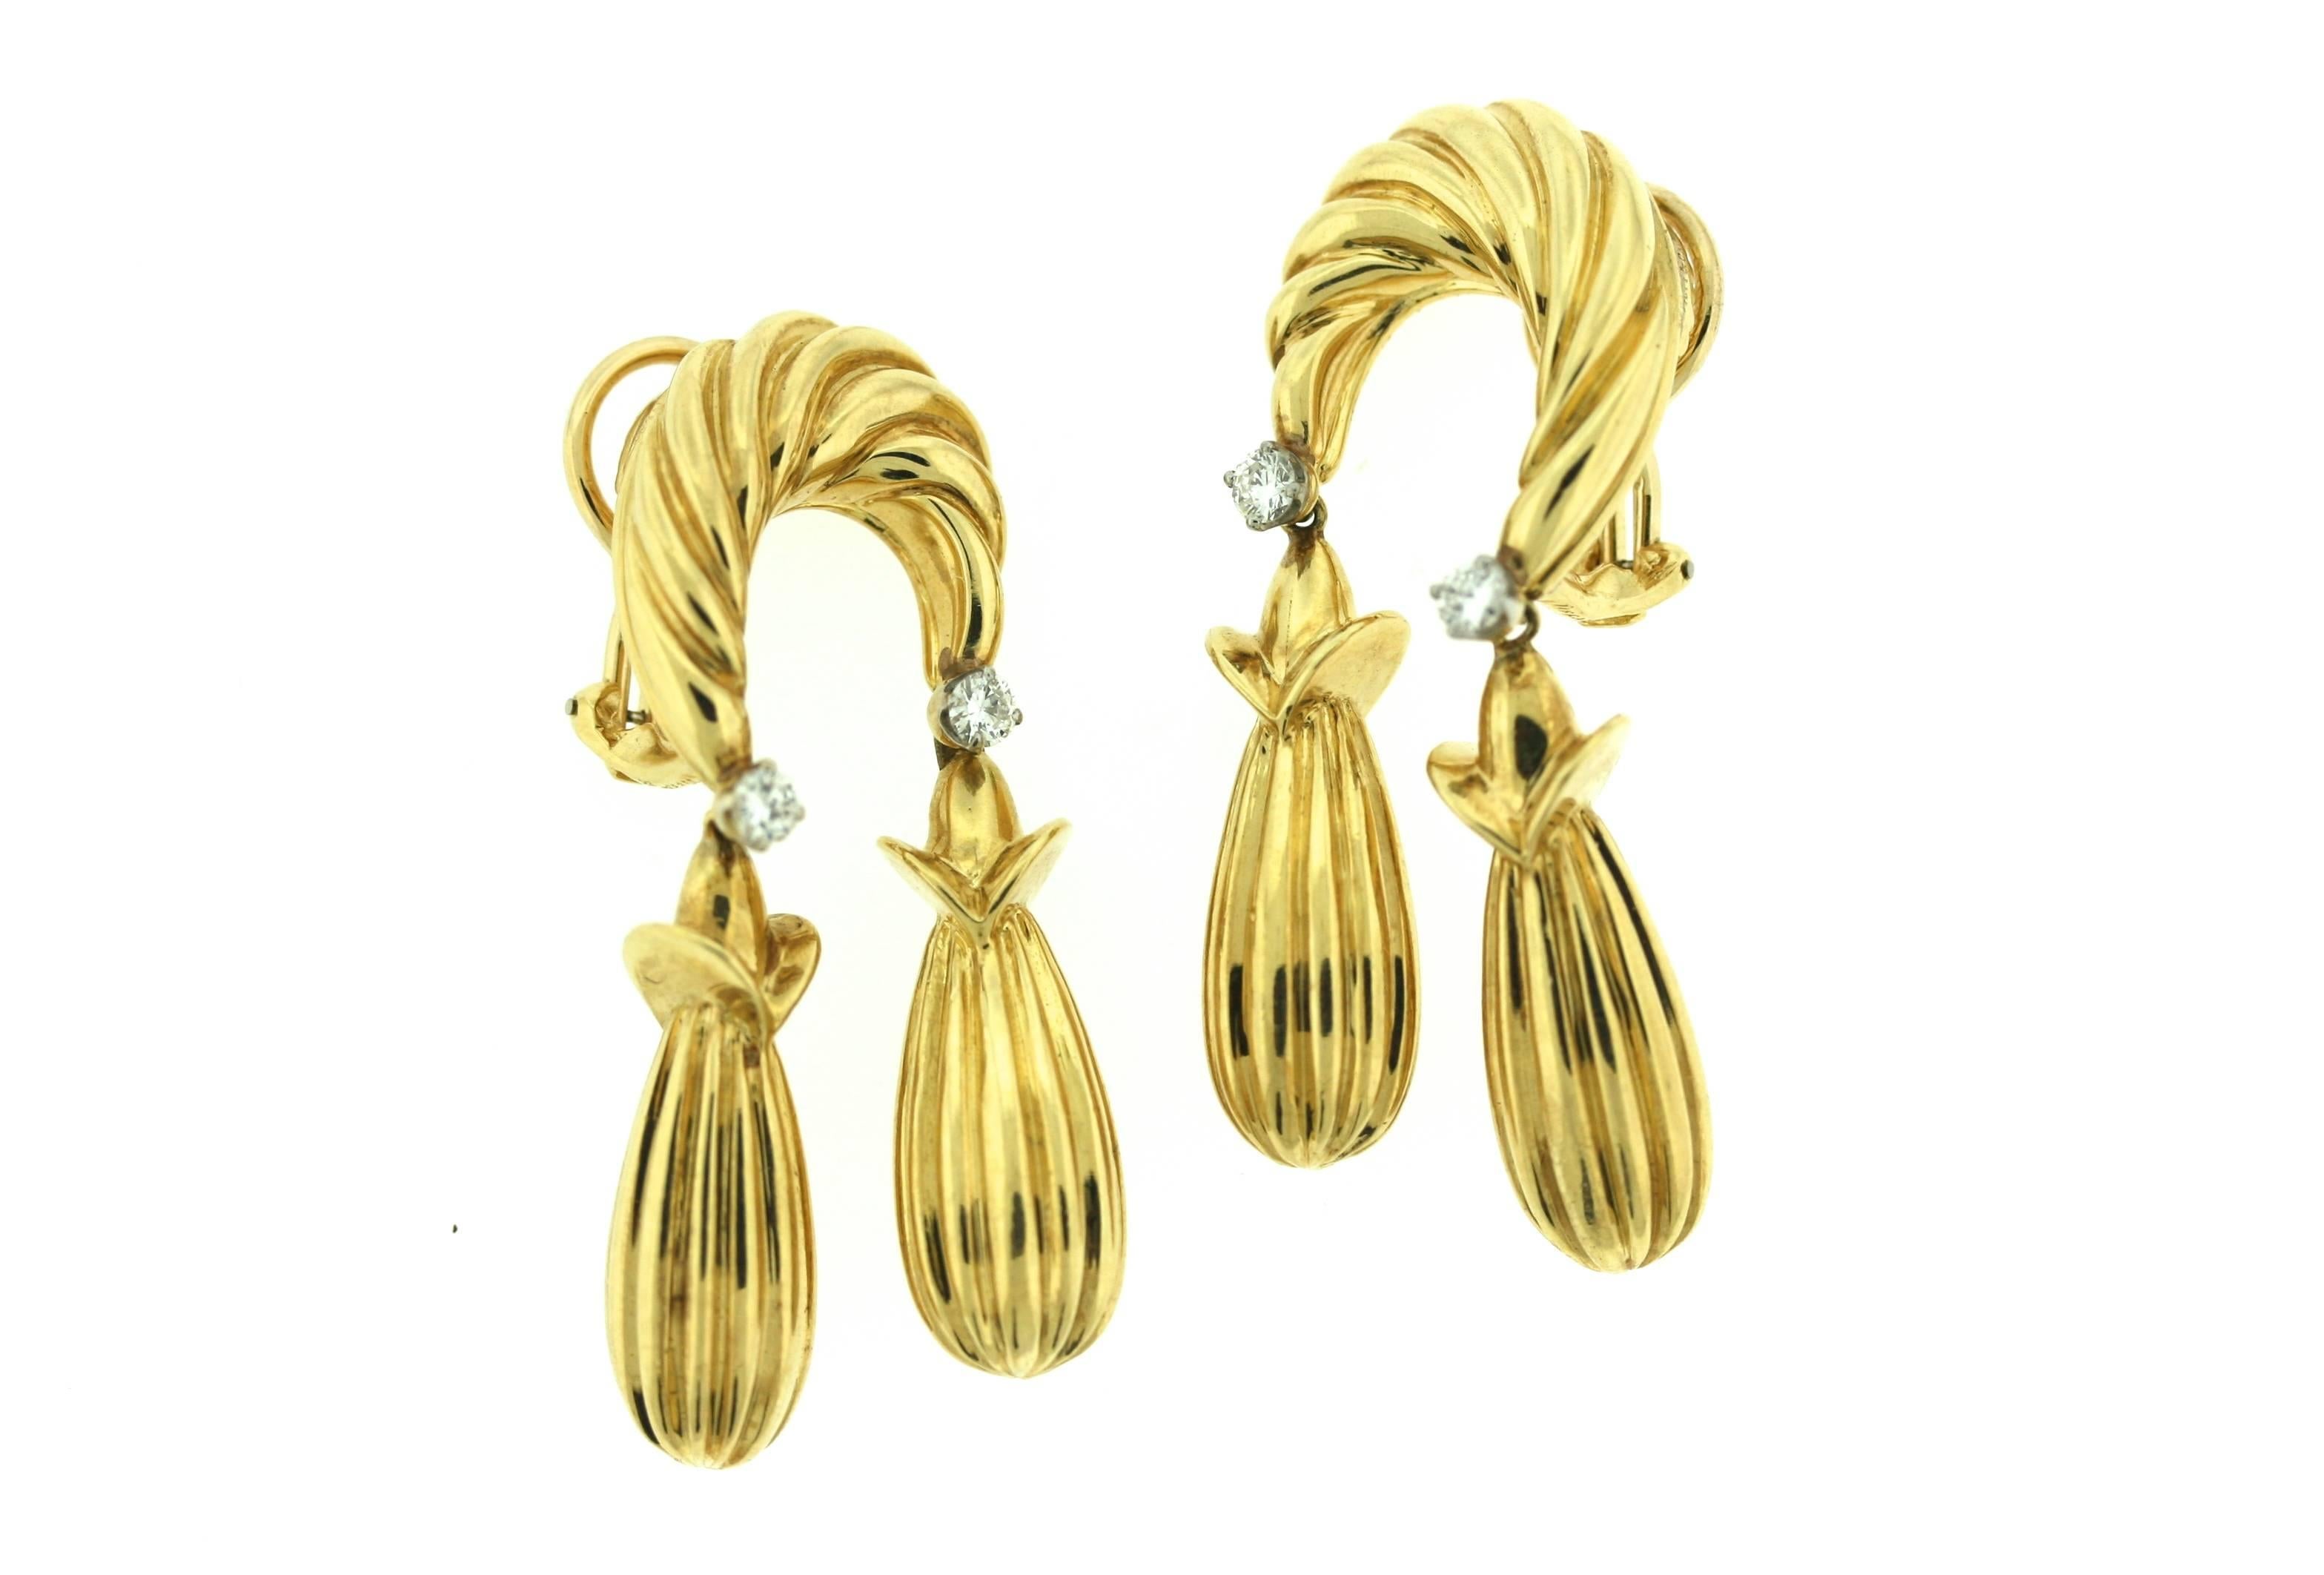 Tiffany & Co. Diamond Gold Earrings In Excellent Condition For Sale In New York, NY